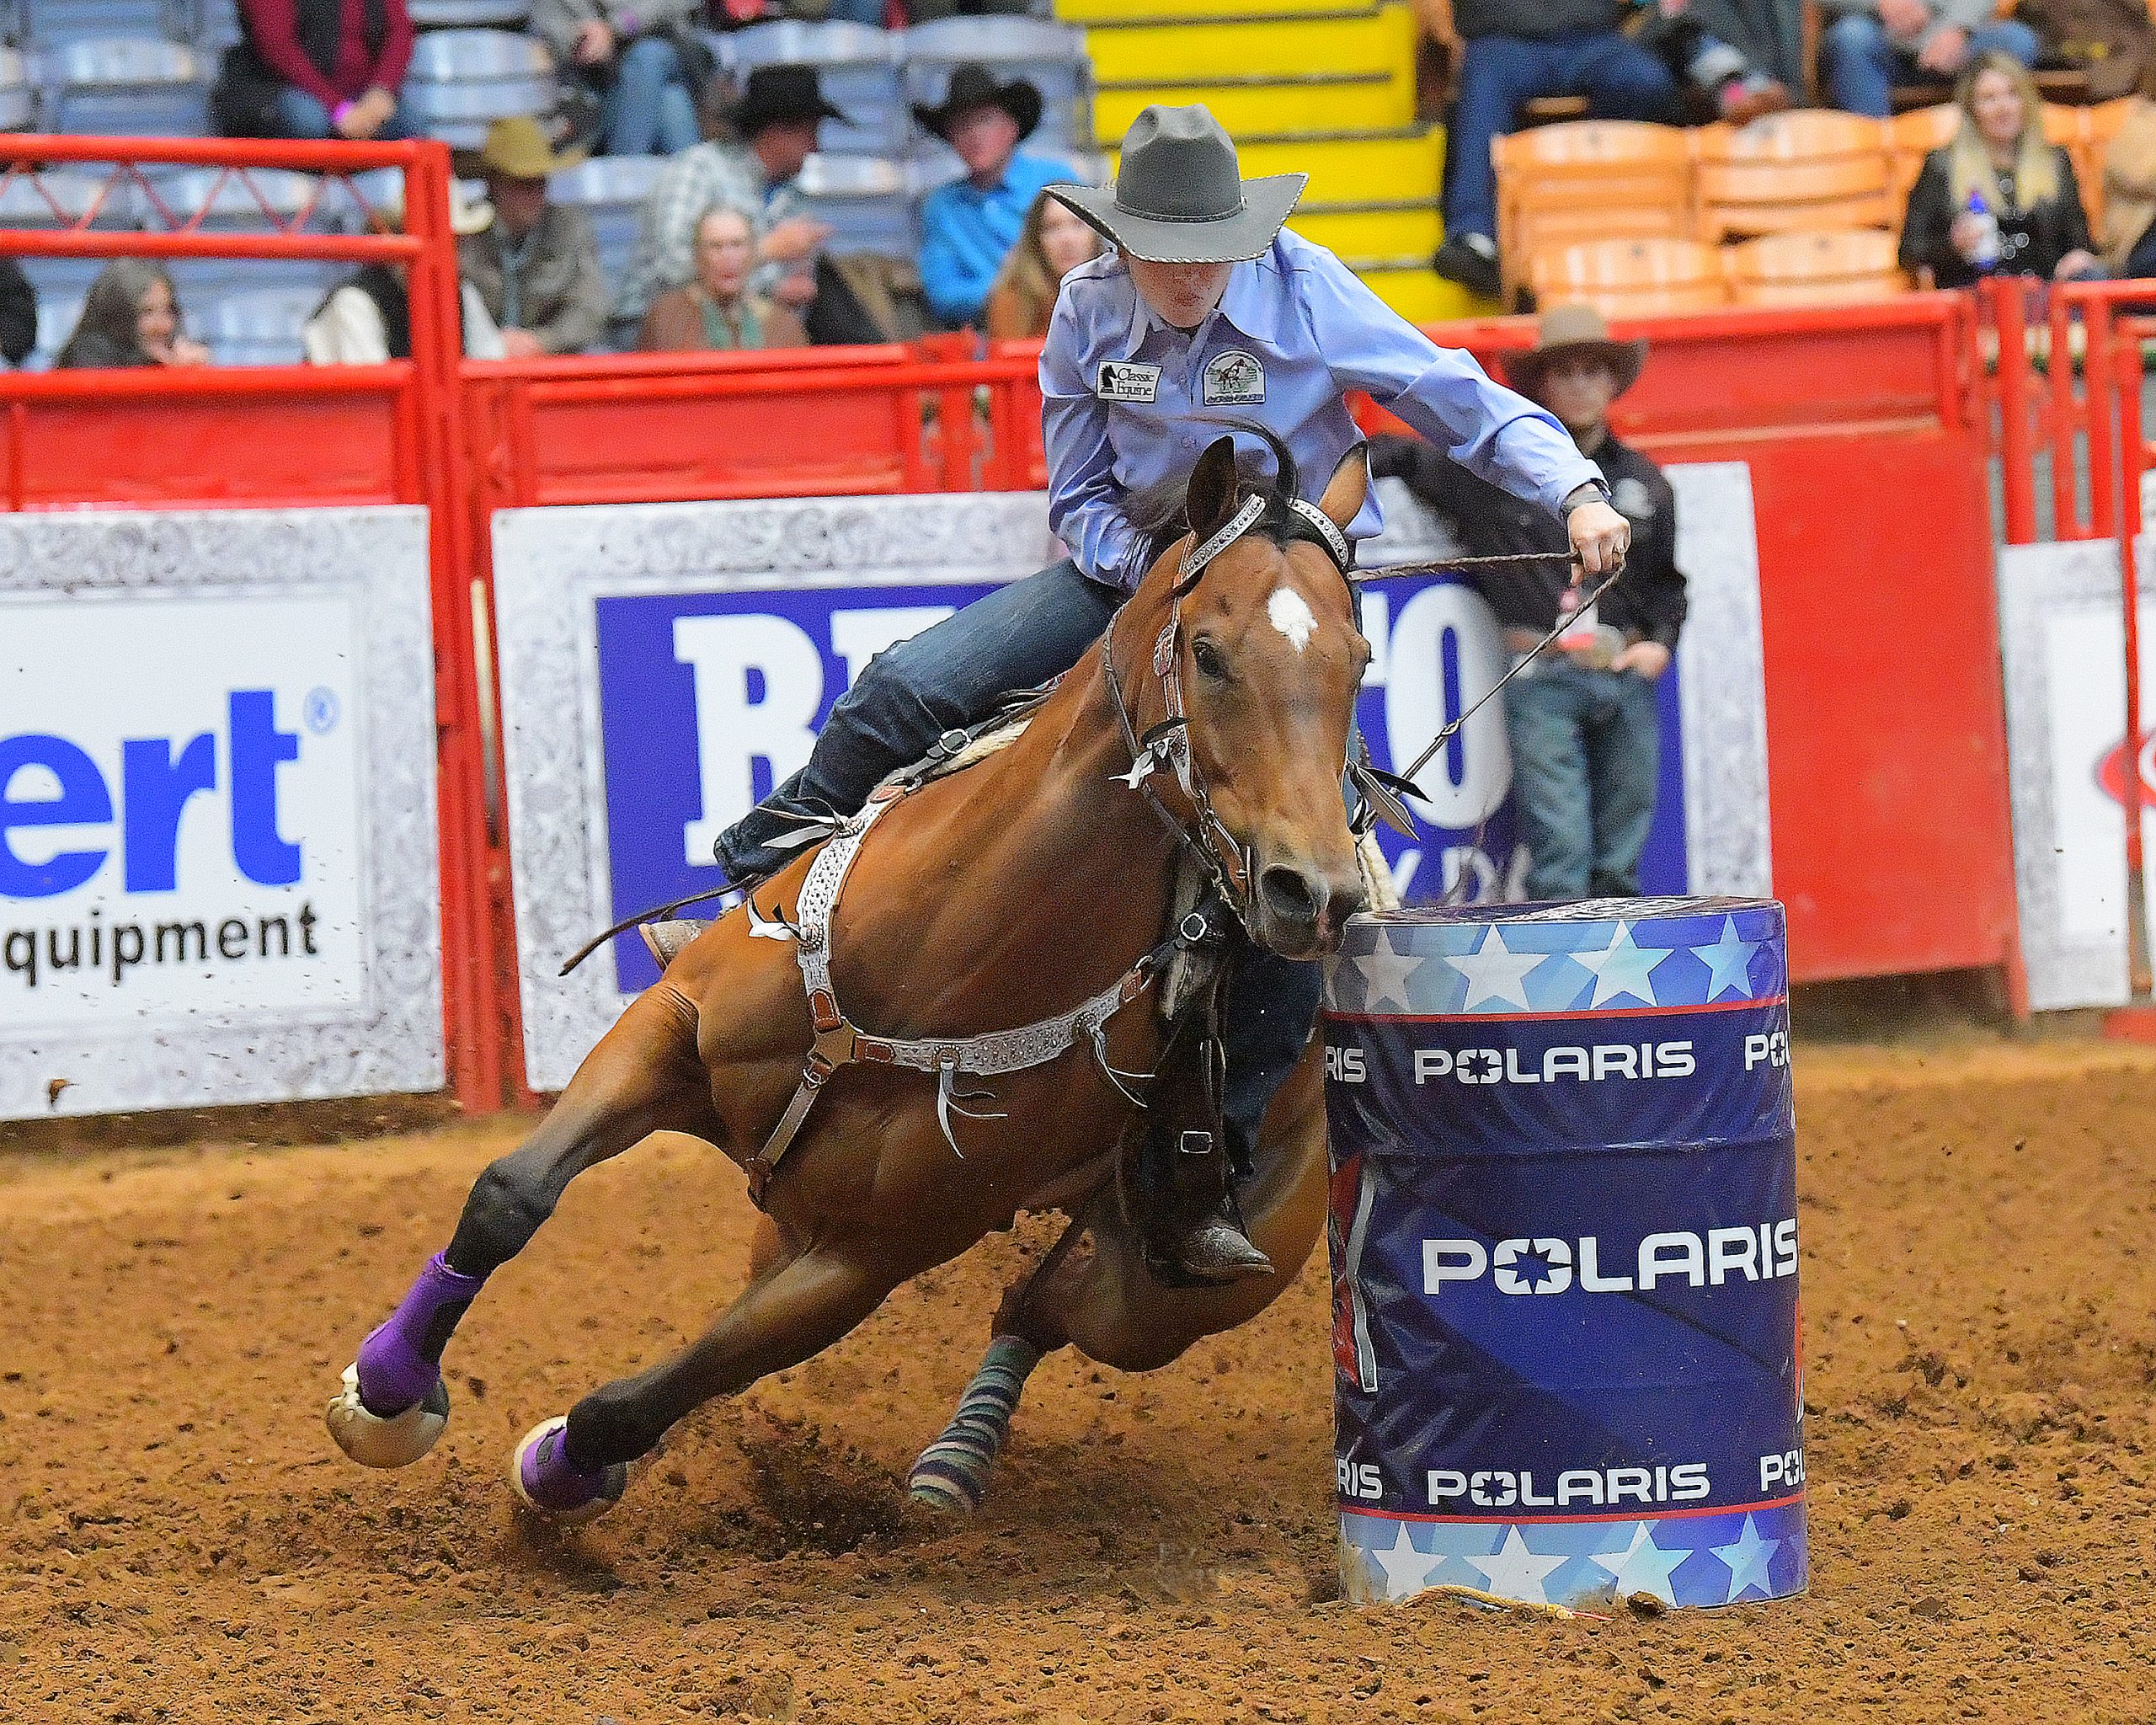 Leslie Willis riding Gimme Damoney at the North Side Coliseum Arena in Ft. Worth, Texas, qualifying to the top 30 barrel racers.